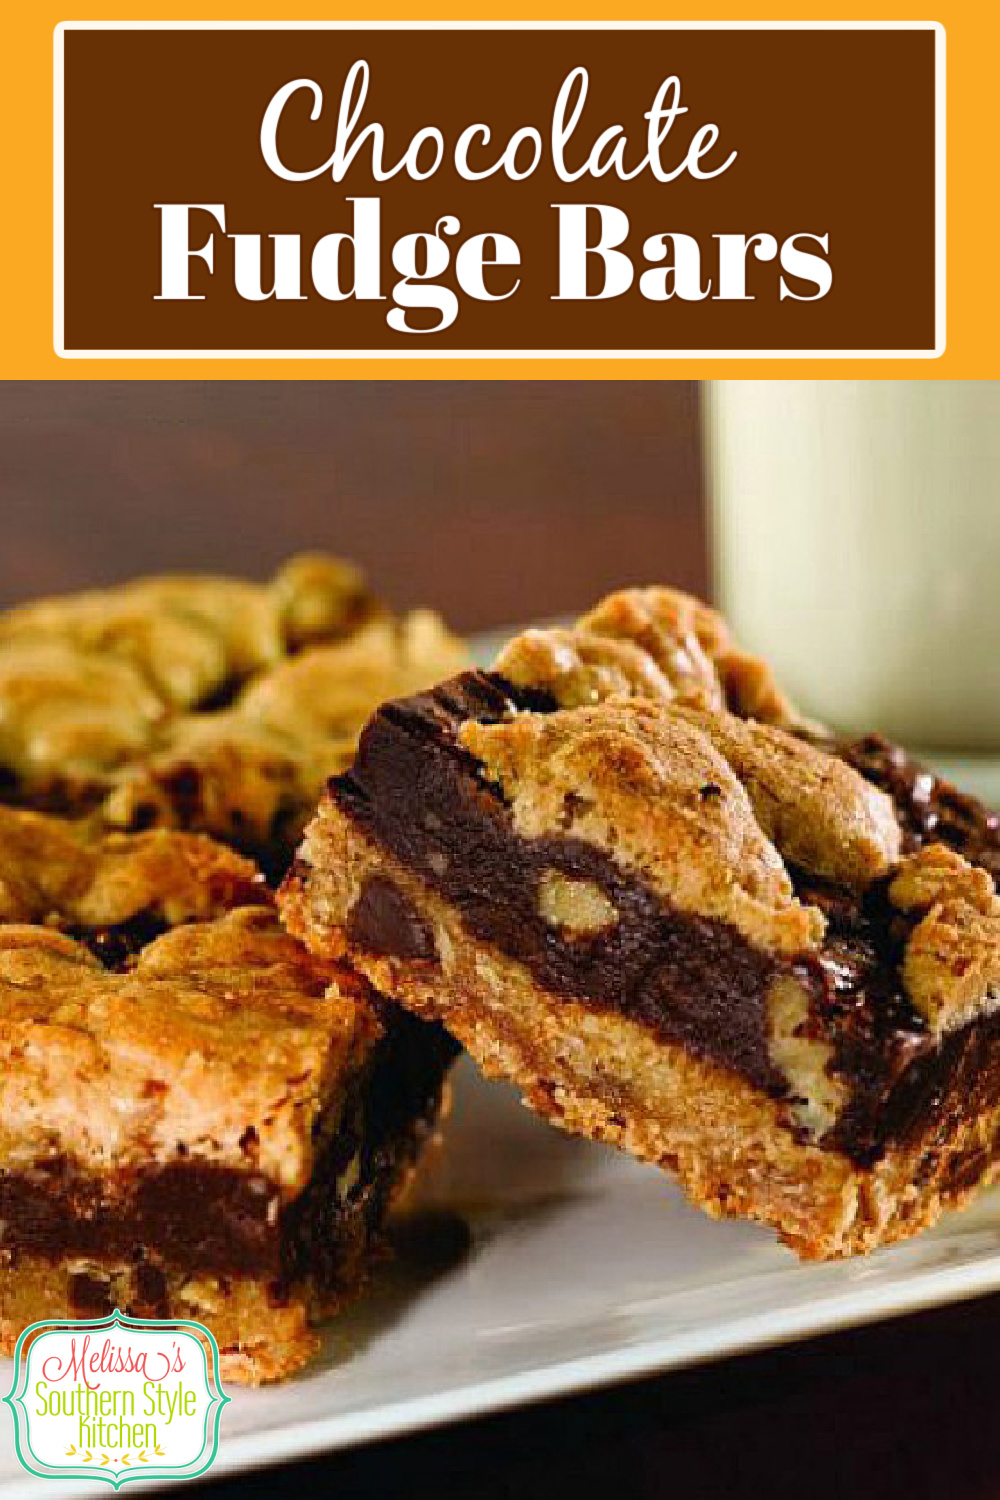 Treat yourself to these Chocolate Fudge Bars for a handheld chocolate lovers dessert #chocolatebars #chocolatefudgebars #cookiebars #barrecipes #chocolate #holidaybaking #holidayrecipes #dessert #dessertfoodrecipes #southernfood #southernrecipes via @melissasssk